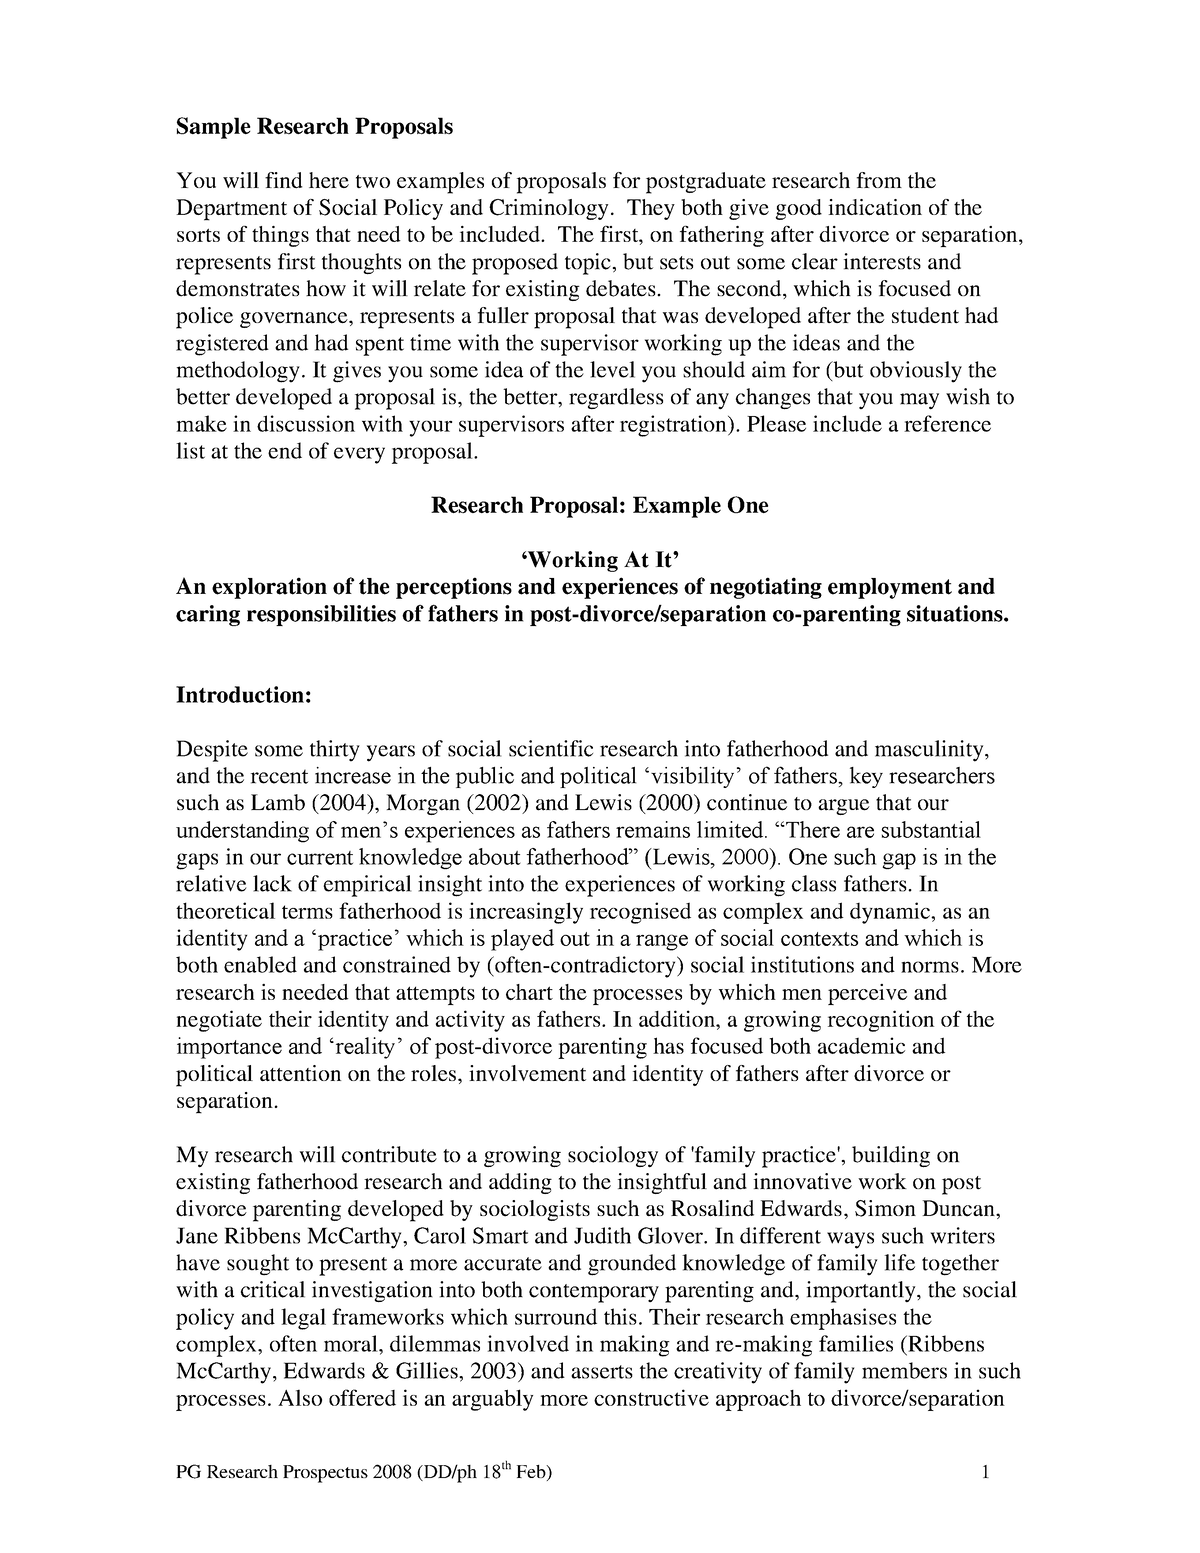 research proposal format for postdoc